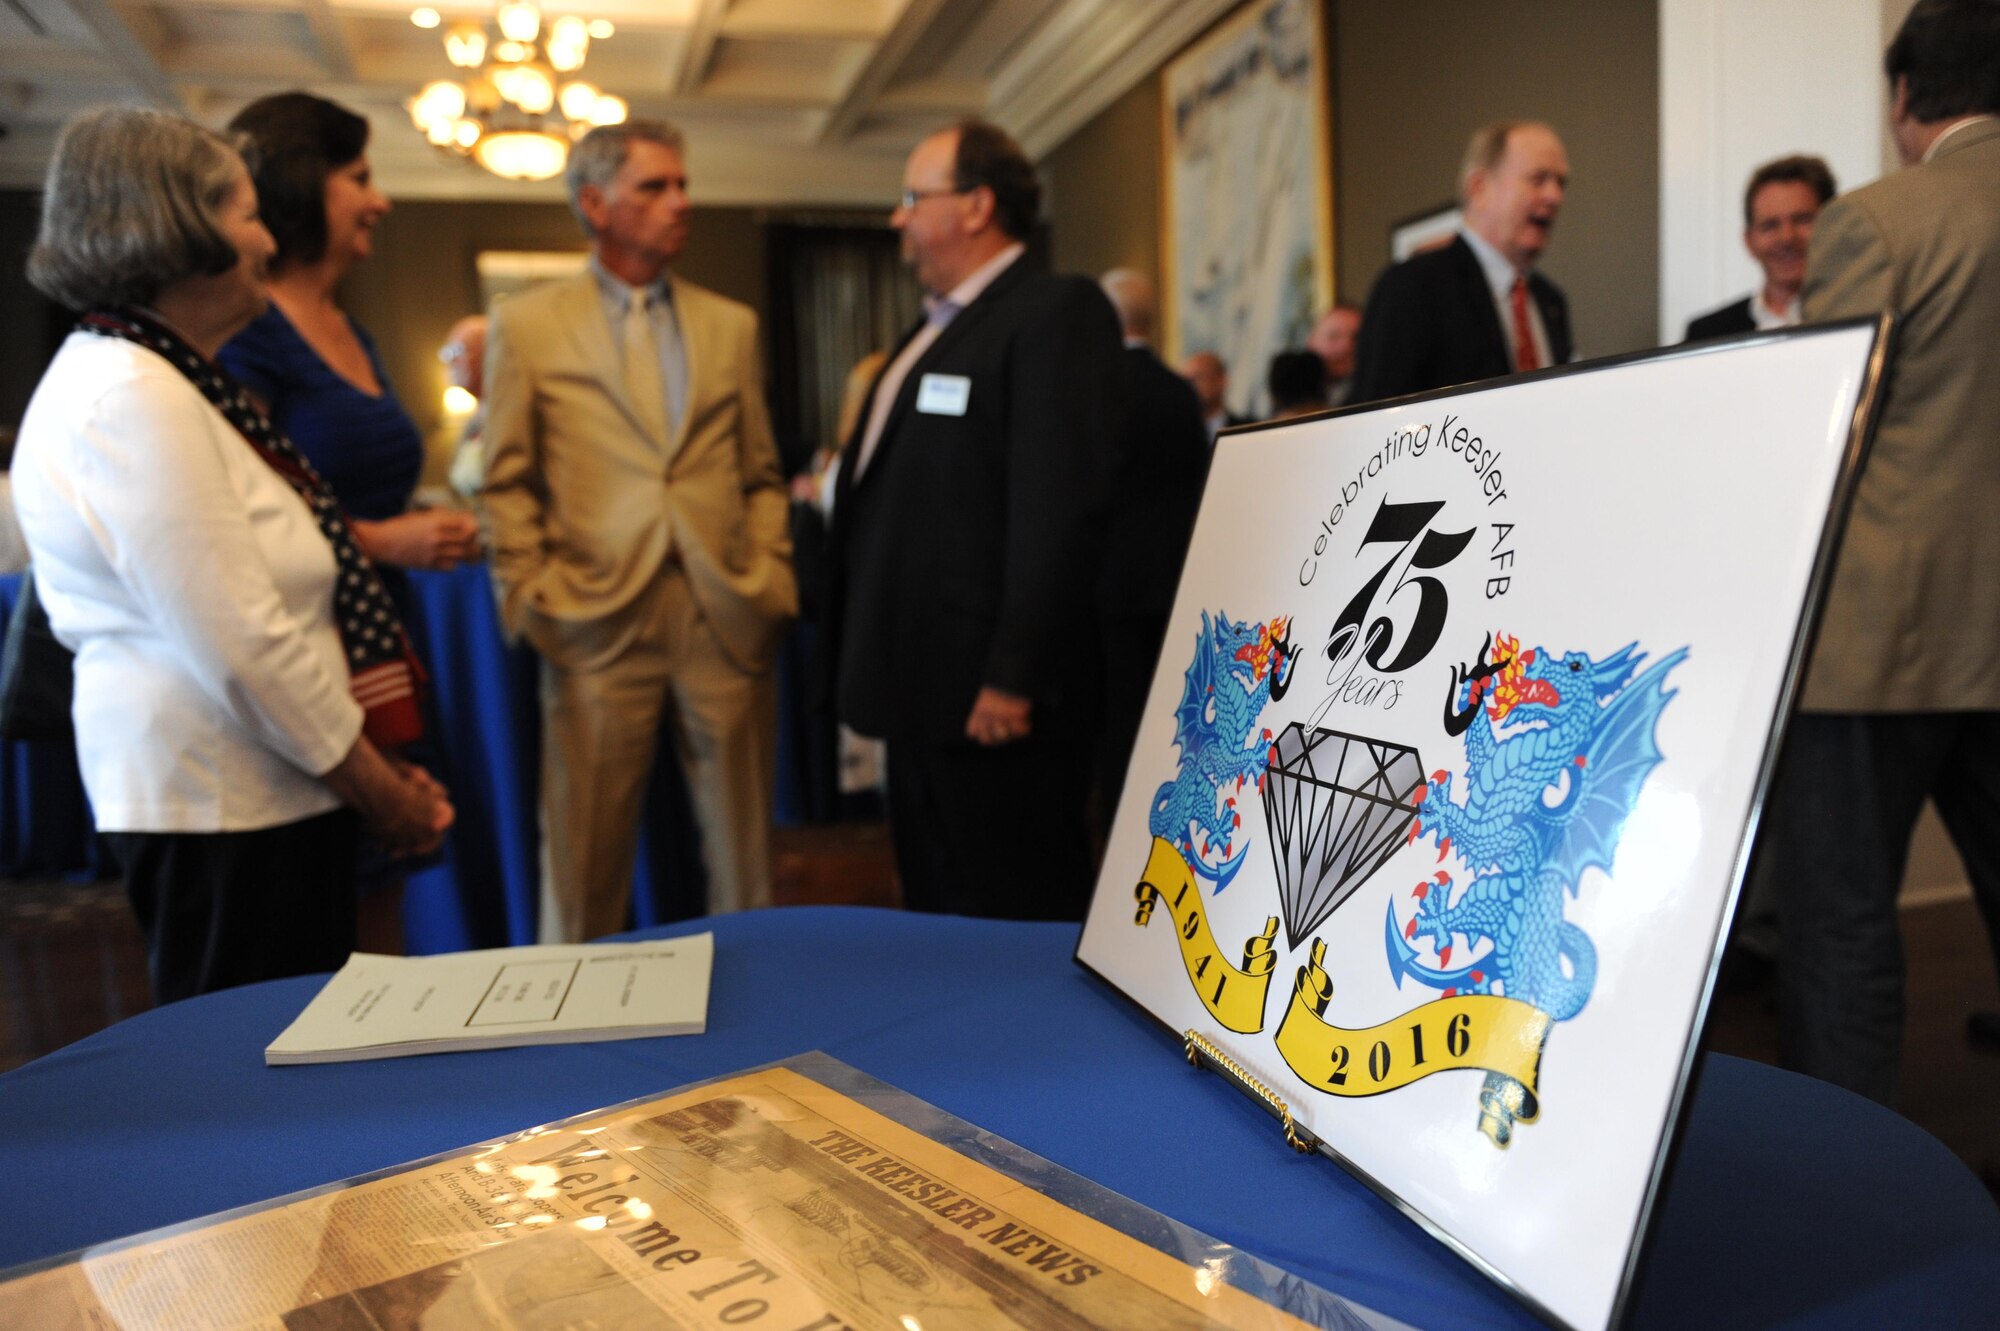 The 75th anniversary logo sits on a table at Keesler’s 75th Anniversary Historical Display Unveiling at the Biloxi Visitors Center June 3, 2016, Biloxi, Miss. A display featuring 14 historical panels created by Keesler personnel was unveiled along with the newest 75th anniversary logo. Additionally, Biloxi Mayor Andrew ‘FoFo’ Gilich read the “Biloxi/Keesler Partnership Day” proclamation at the event. (U.S. Air Force photo by Kemberly Groue)